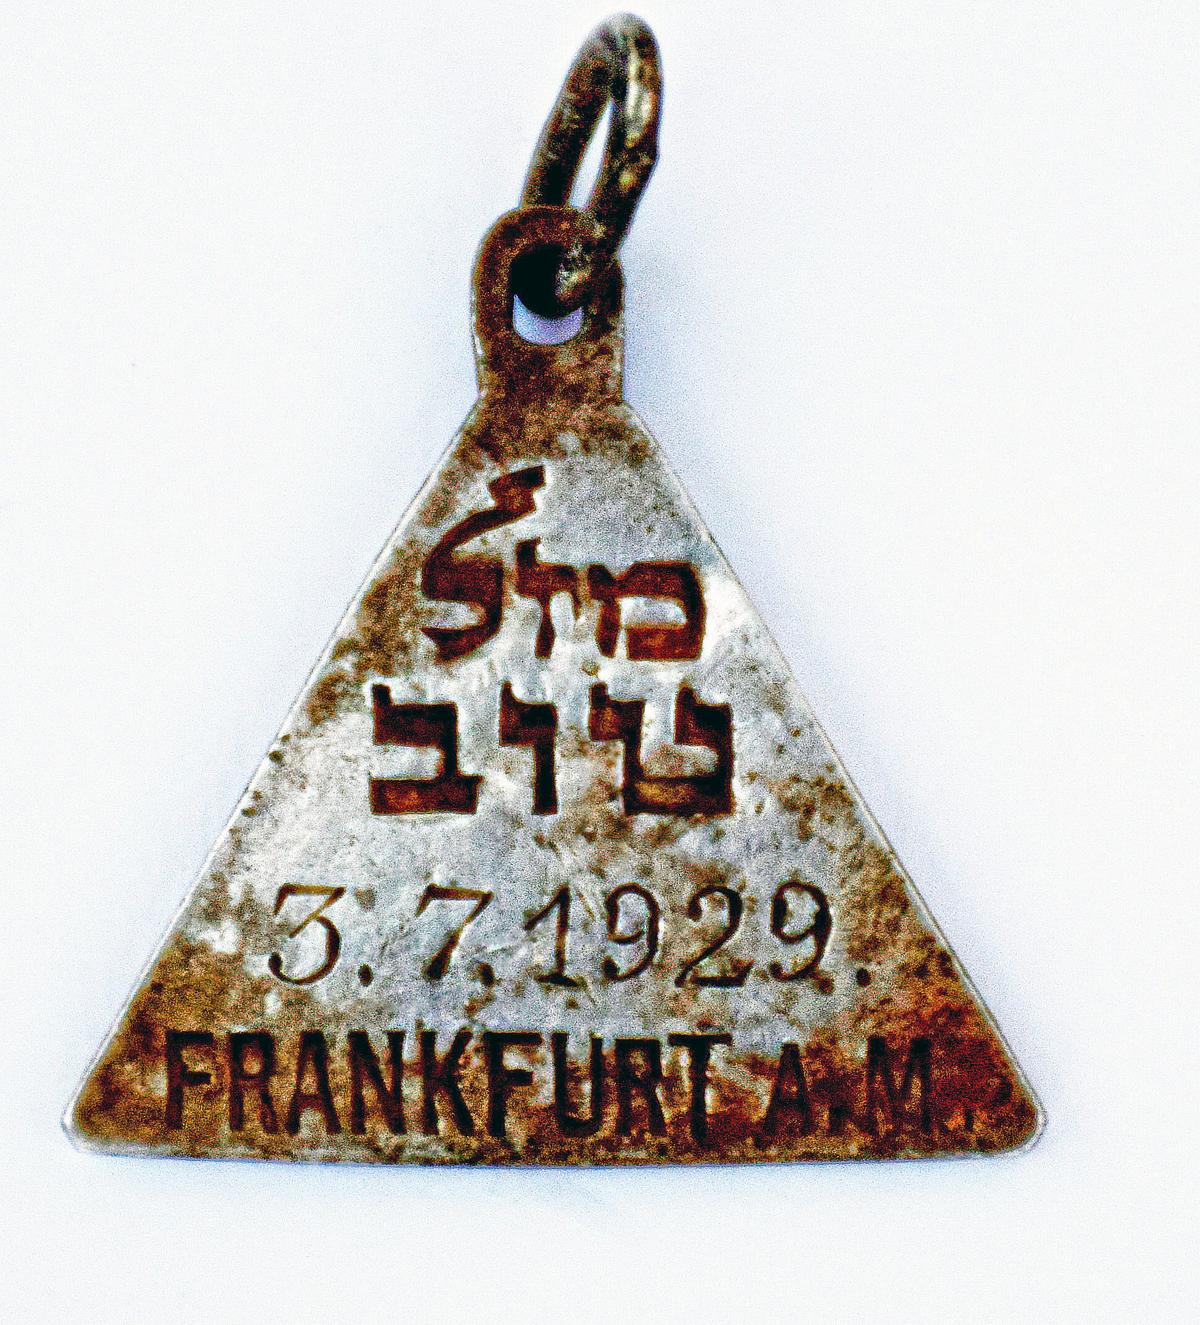 A pendant that appears identical to one belonging to Anne Frank. (Yoram Haimi, Israel Antiquities Authority via AP)